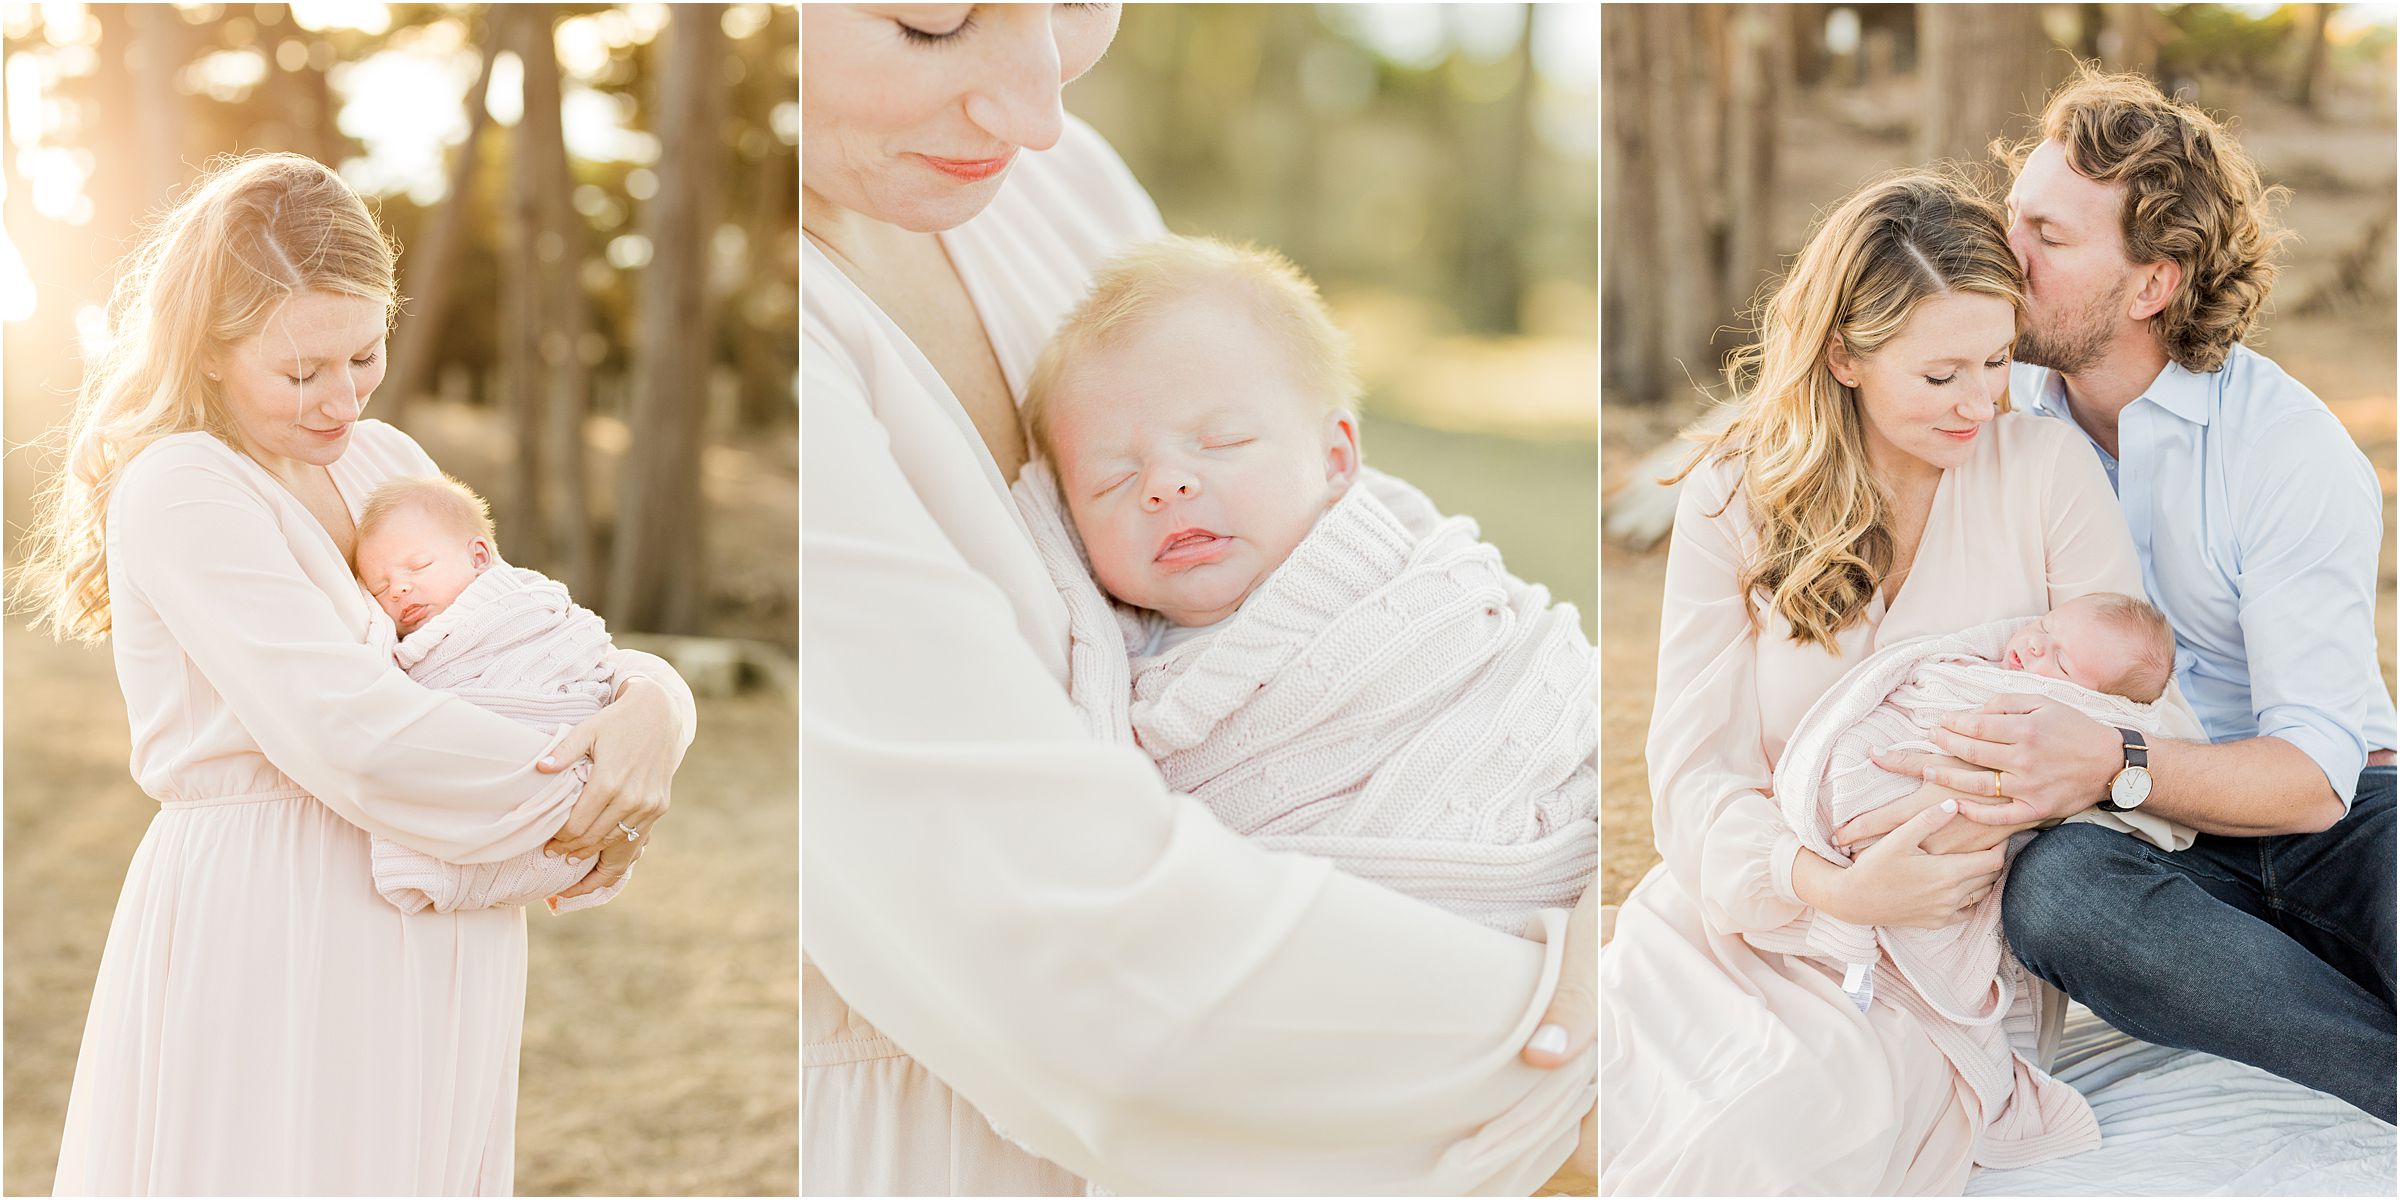 Outdoor Newborn Photography in San Francisco at Lands end Light and airy Bay Area newborn photography